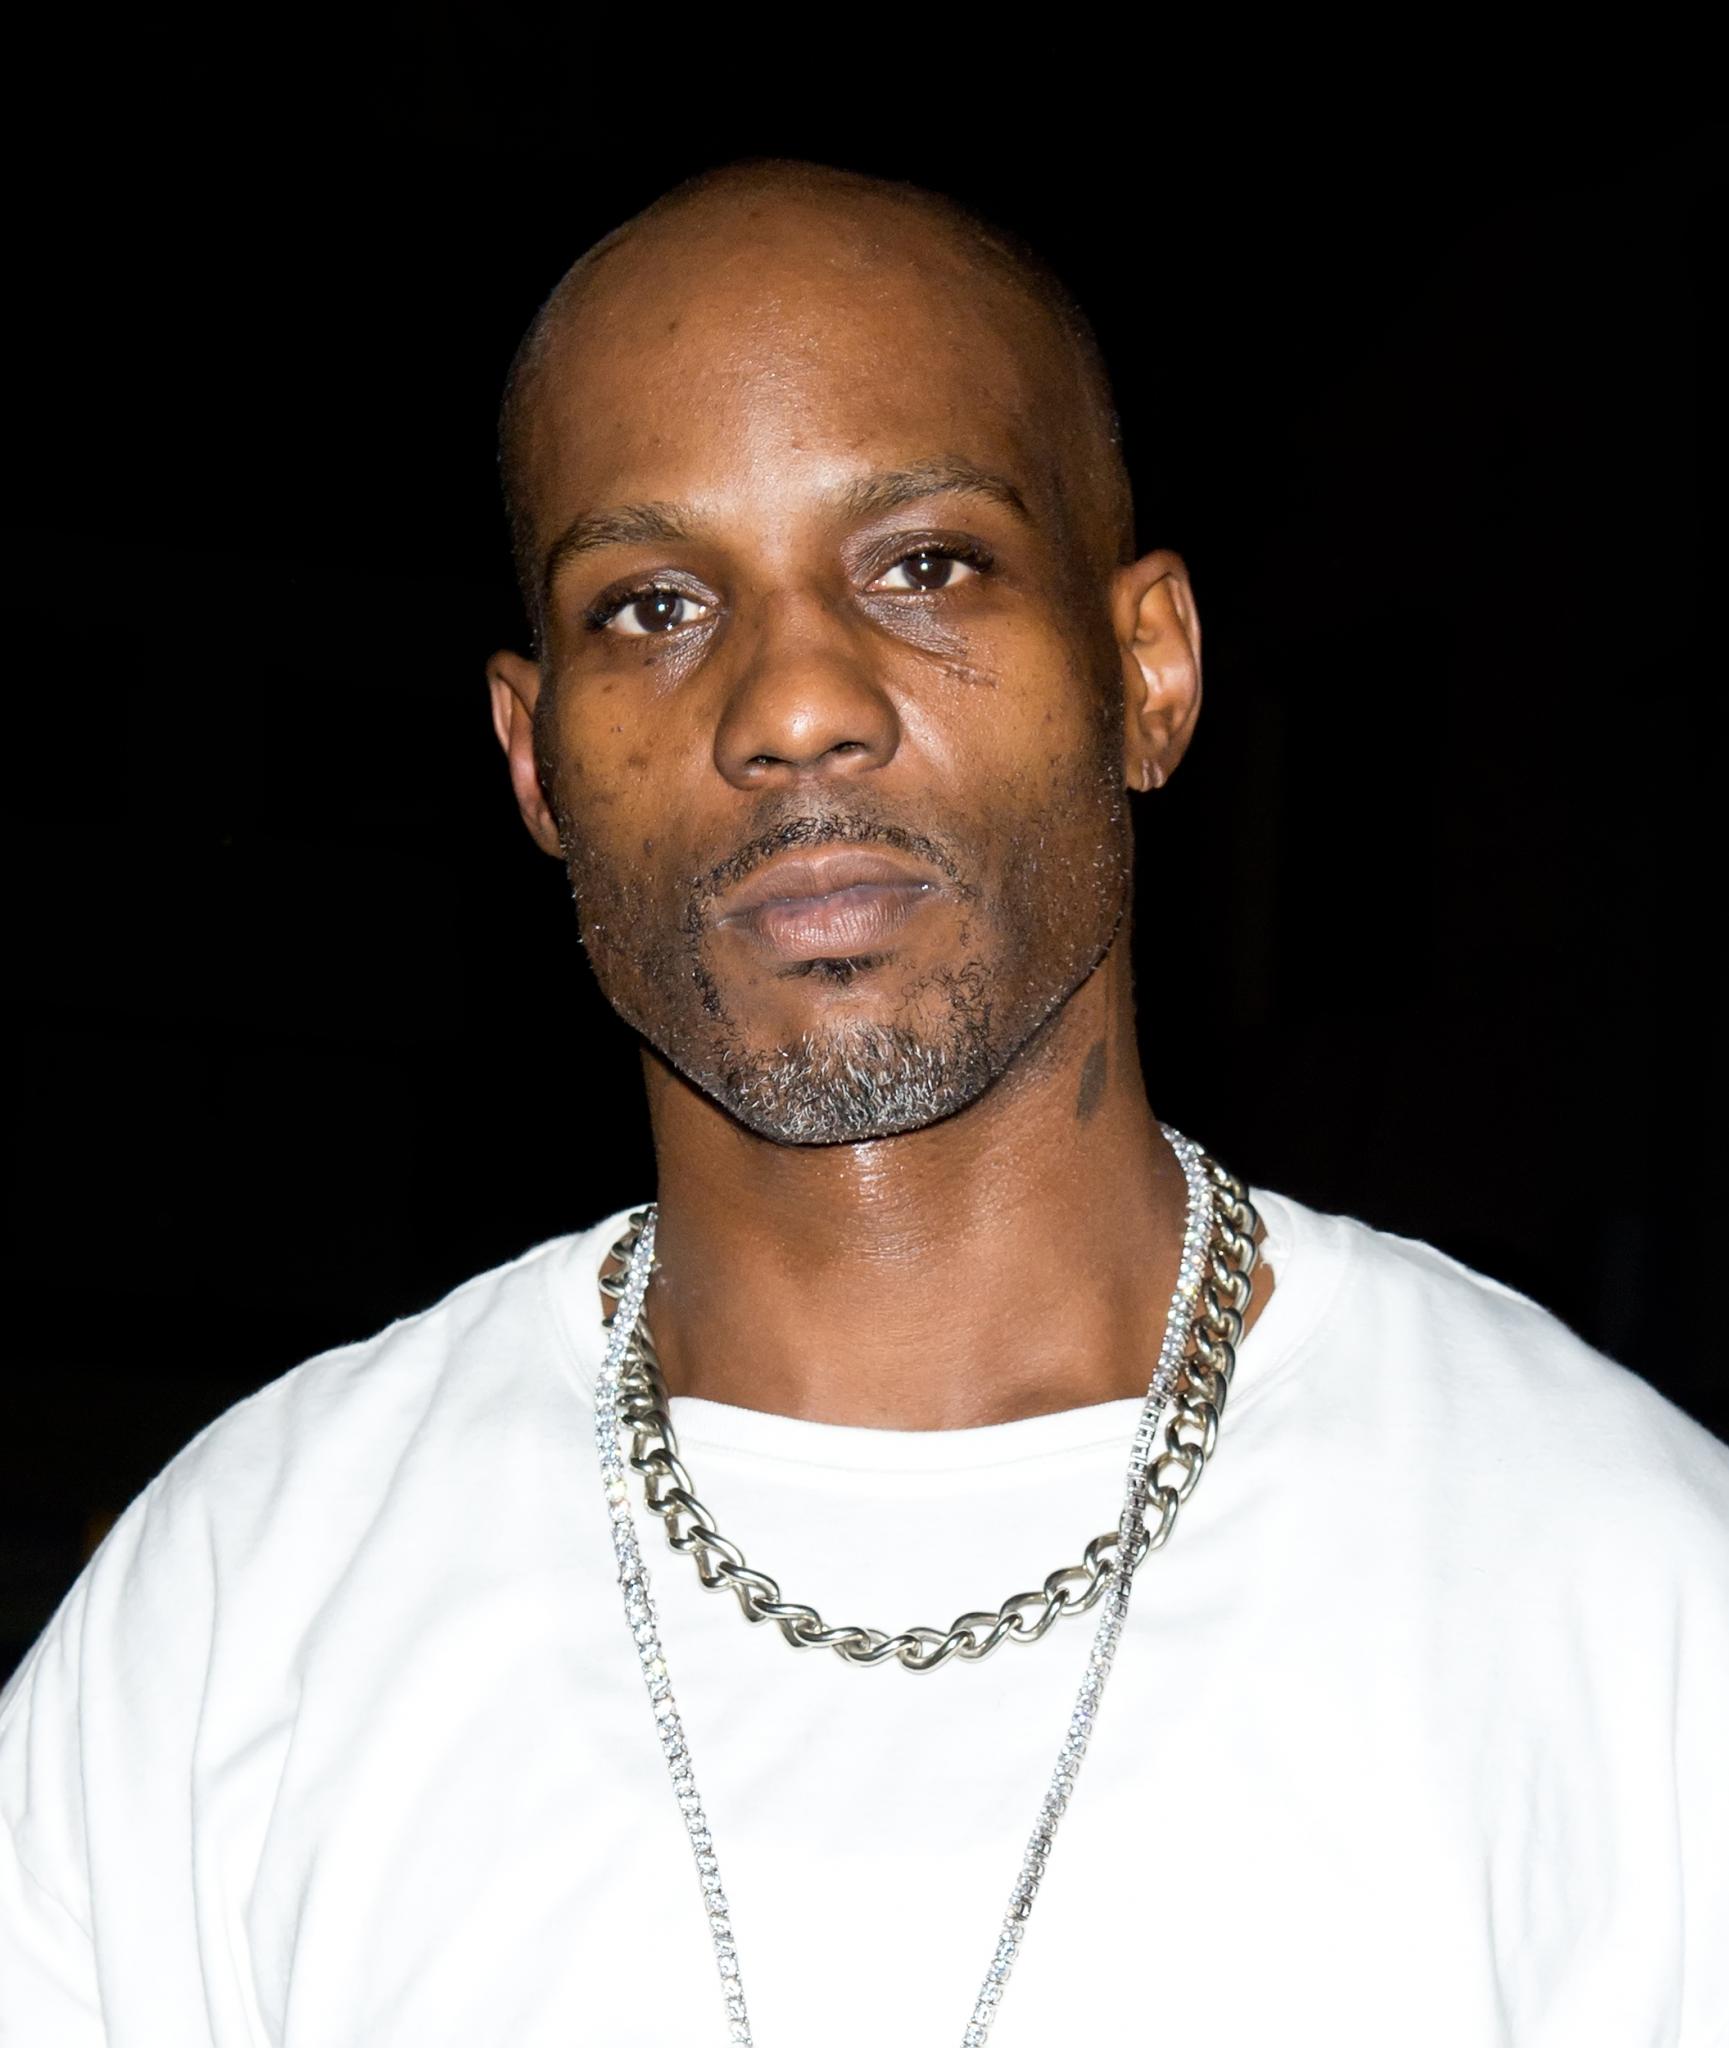 DMX and George Zimmerman Boxing Match Canceled